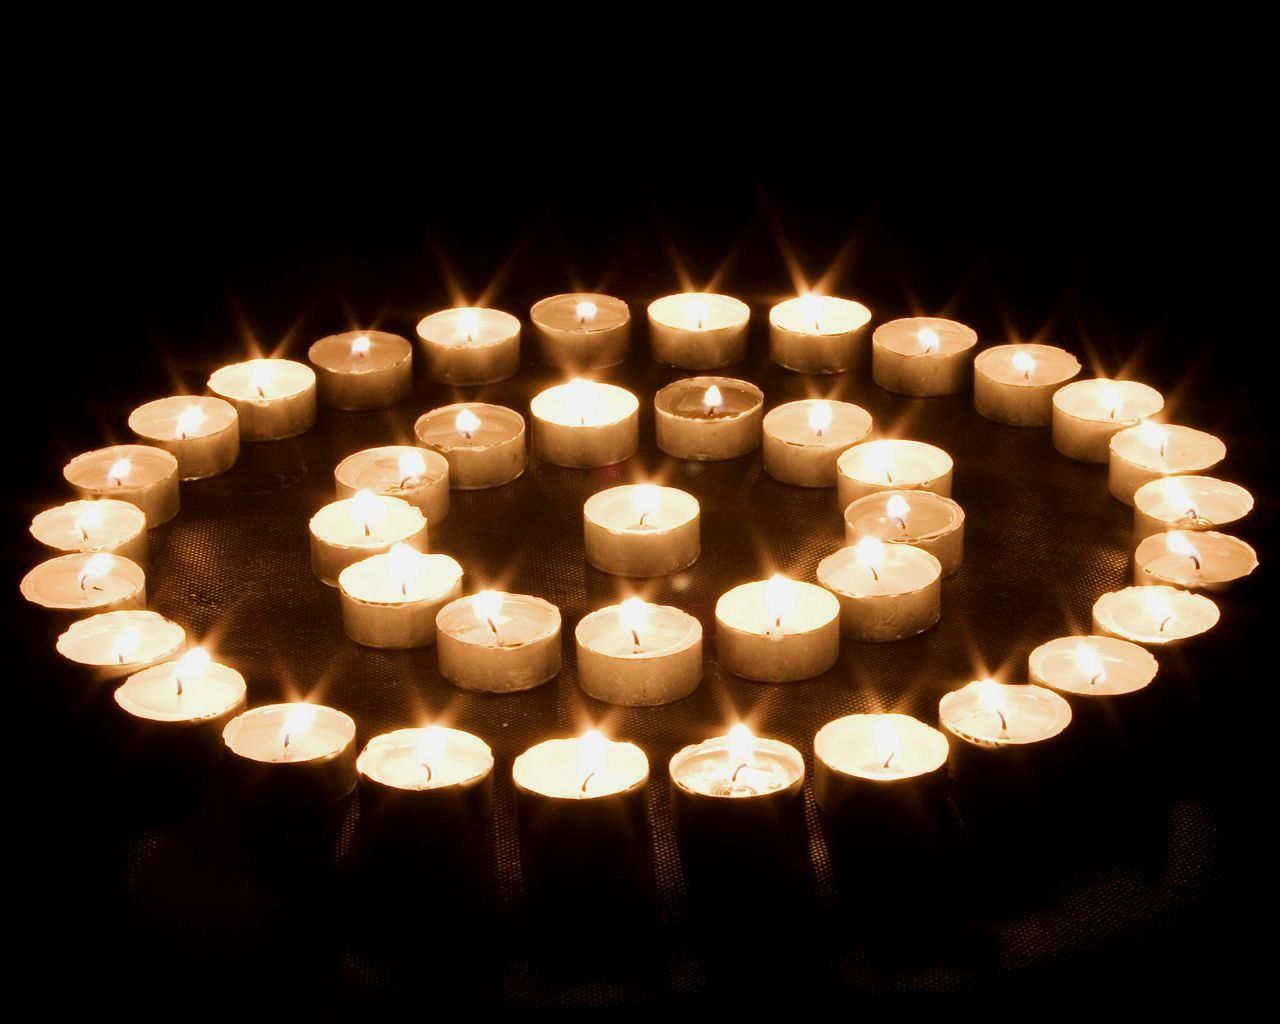 A circle of lit candles in the dark